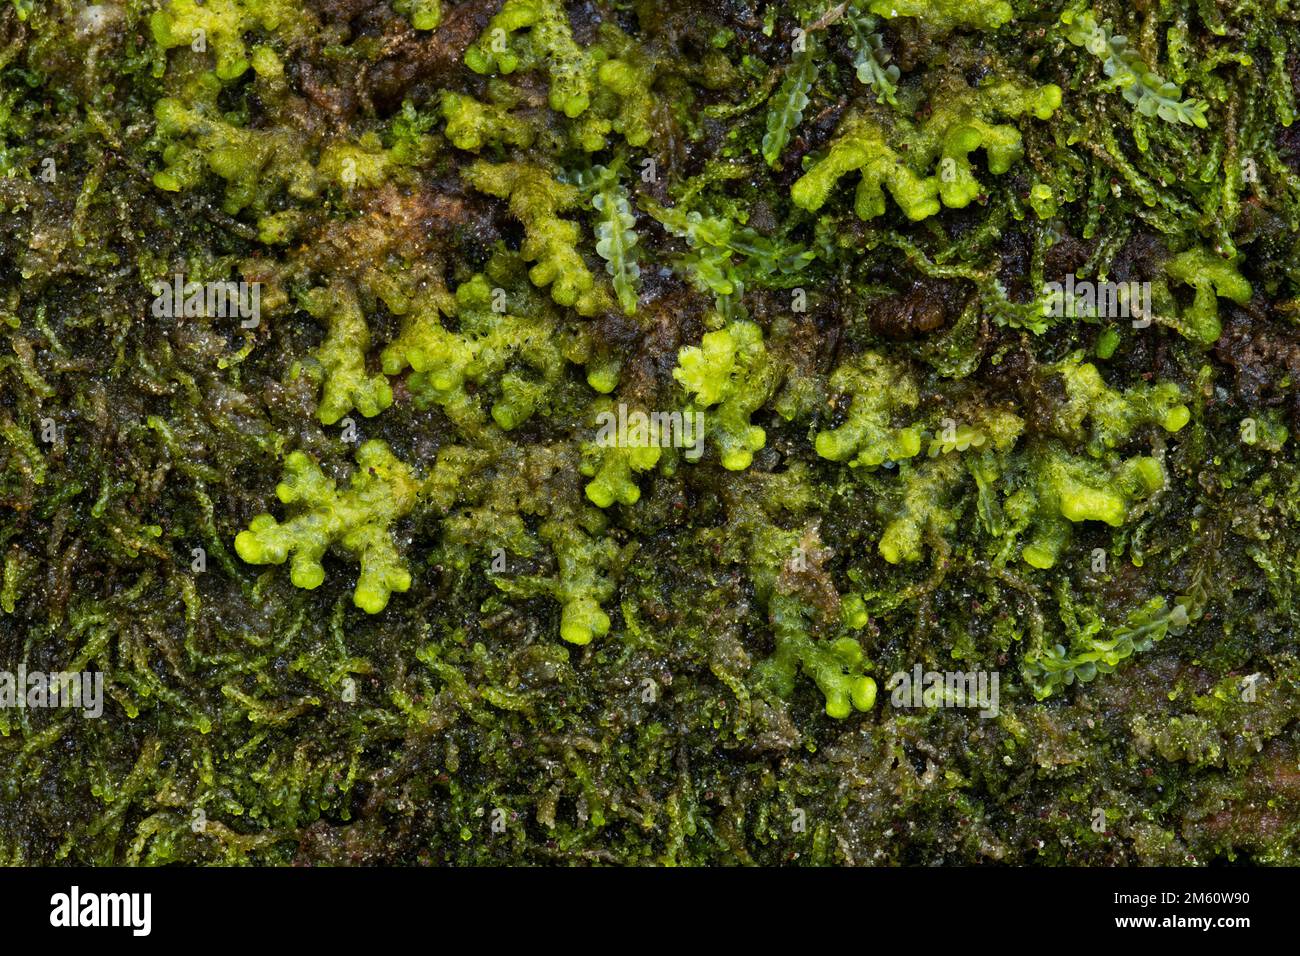 Close-up of Tree fringewort and Rustwort growing on a decaying wood in an old-growth forest in Estonia, Northern Europe Stock Photo